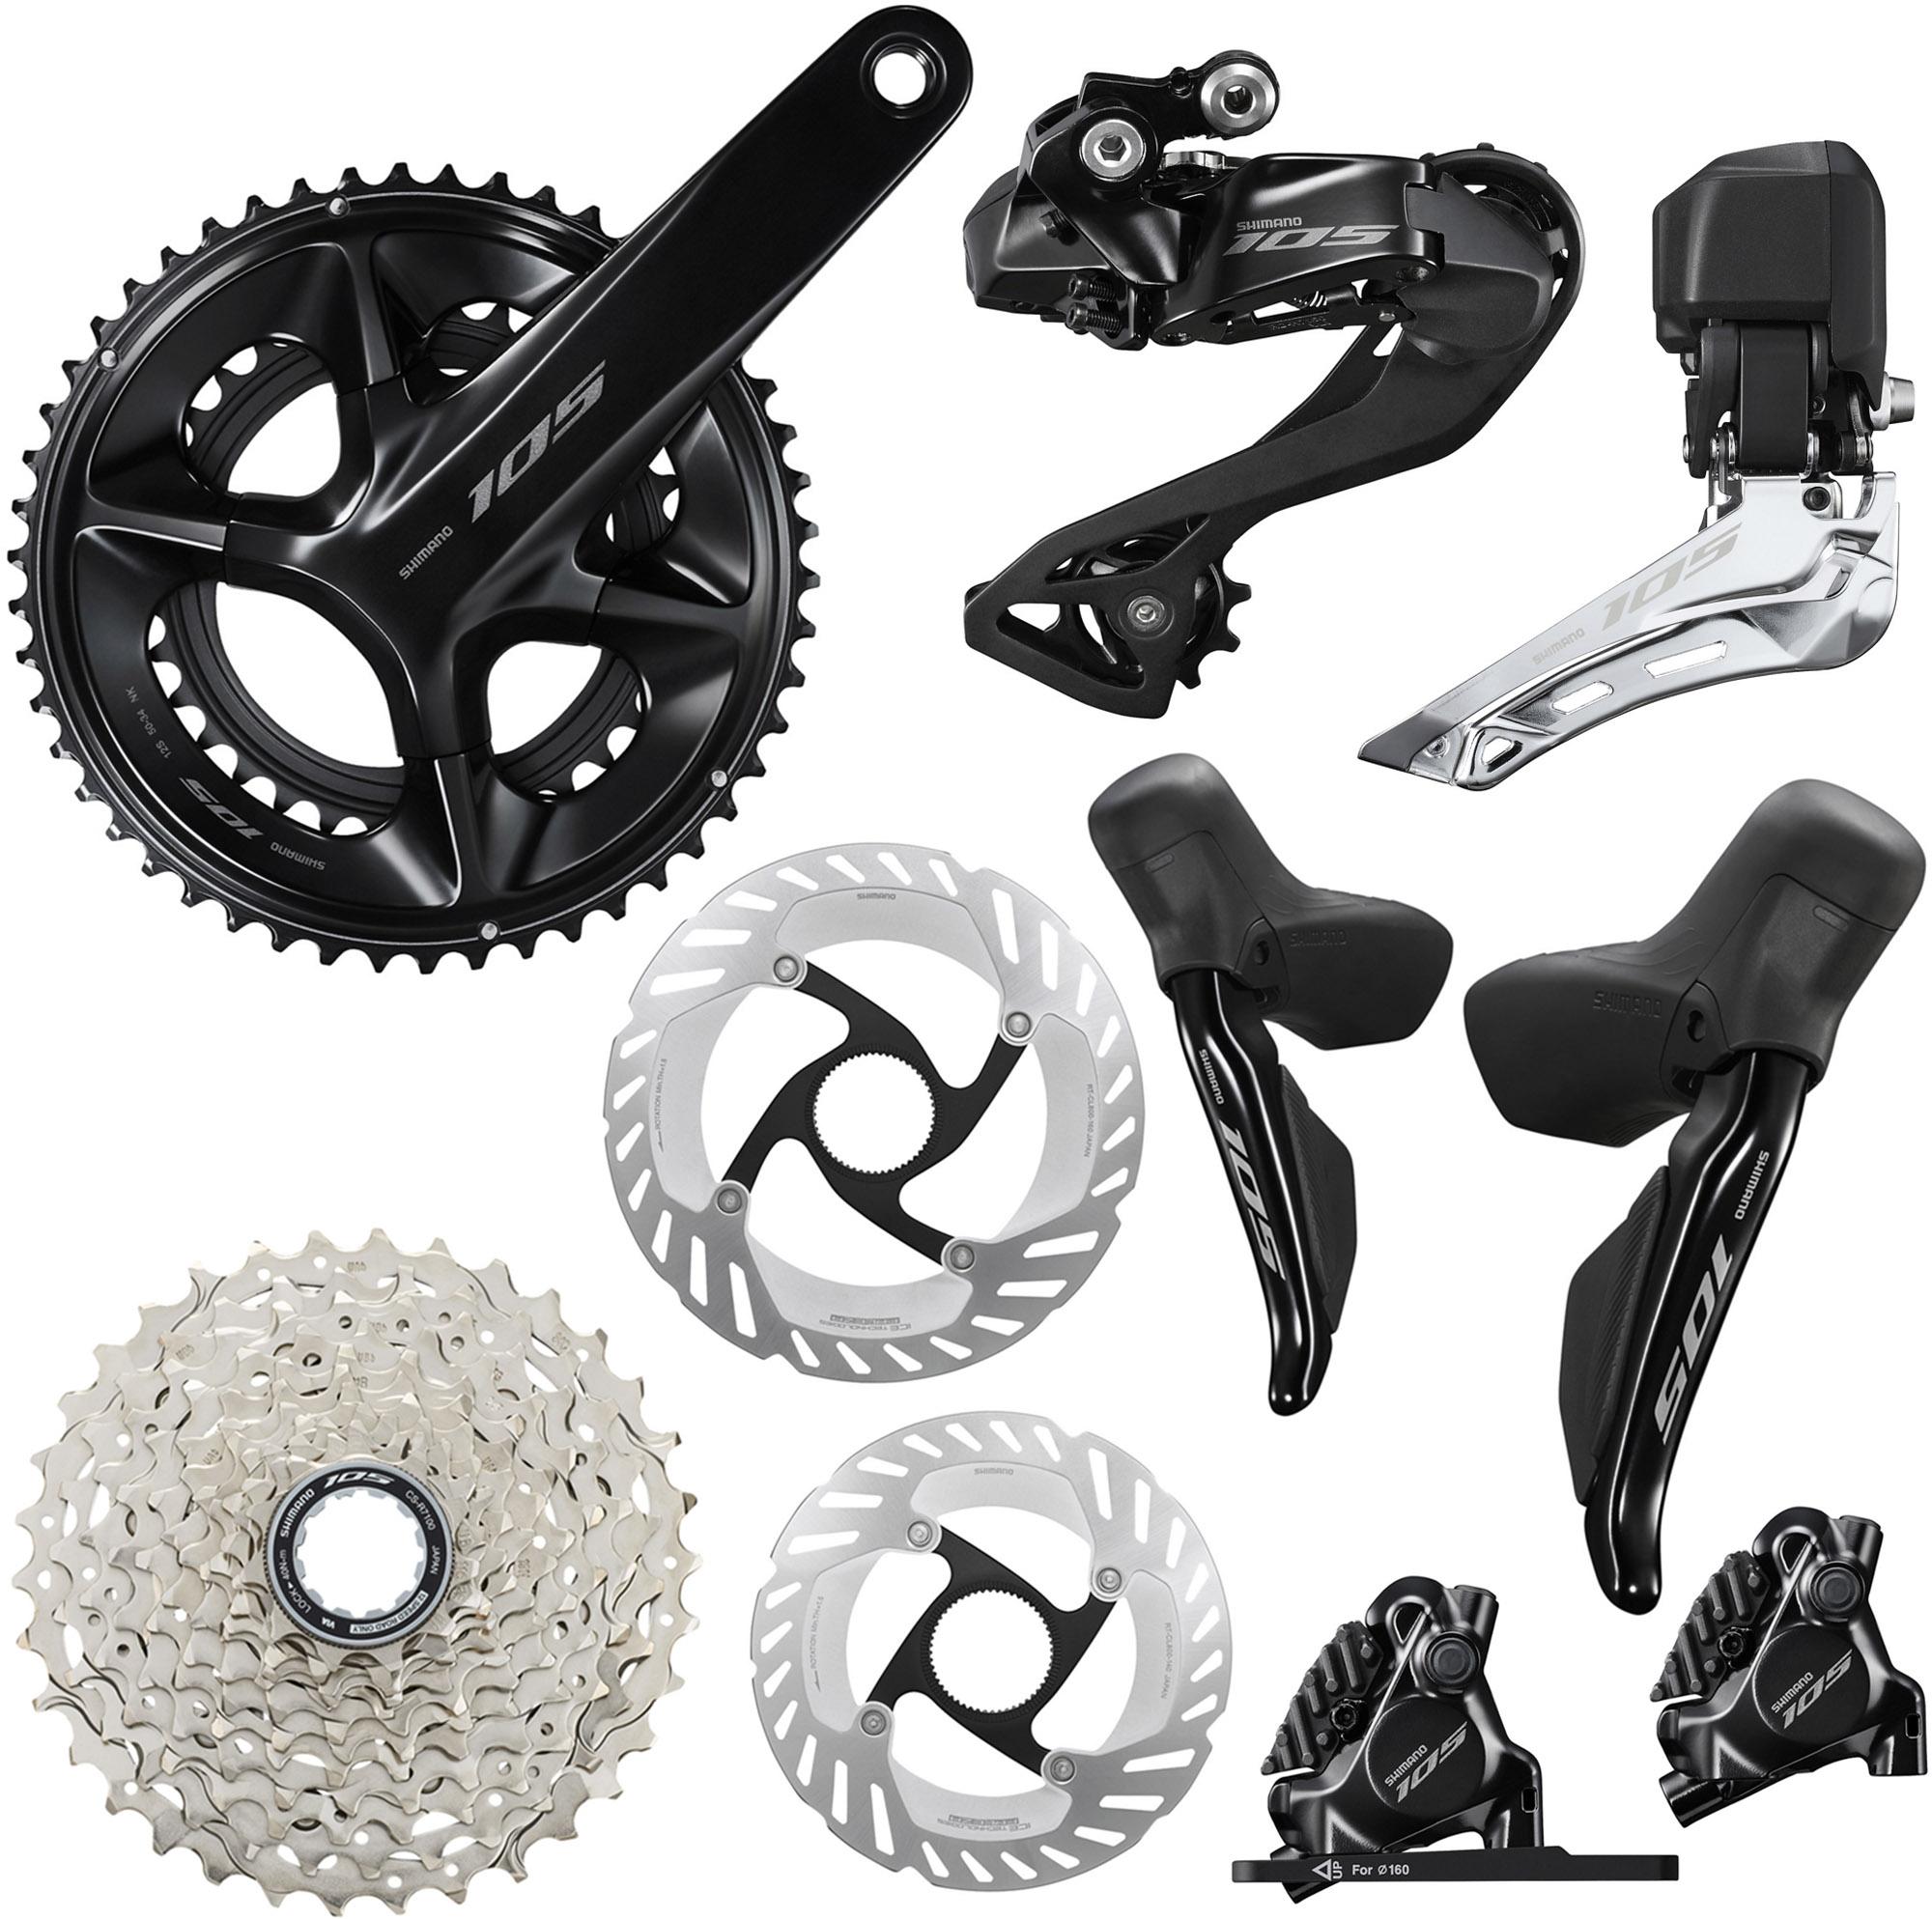 Shimano 105 R7100 Di2 Complete Disc Groupset  Grey